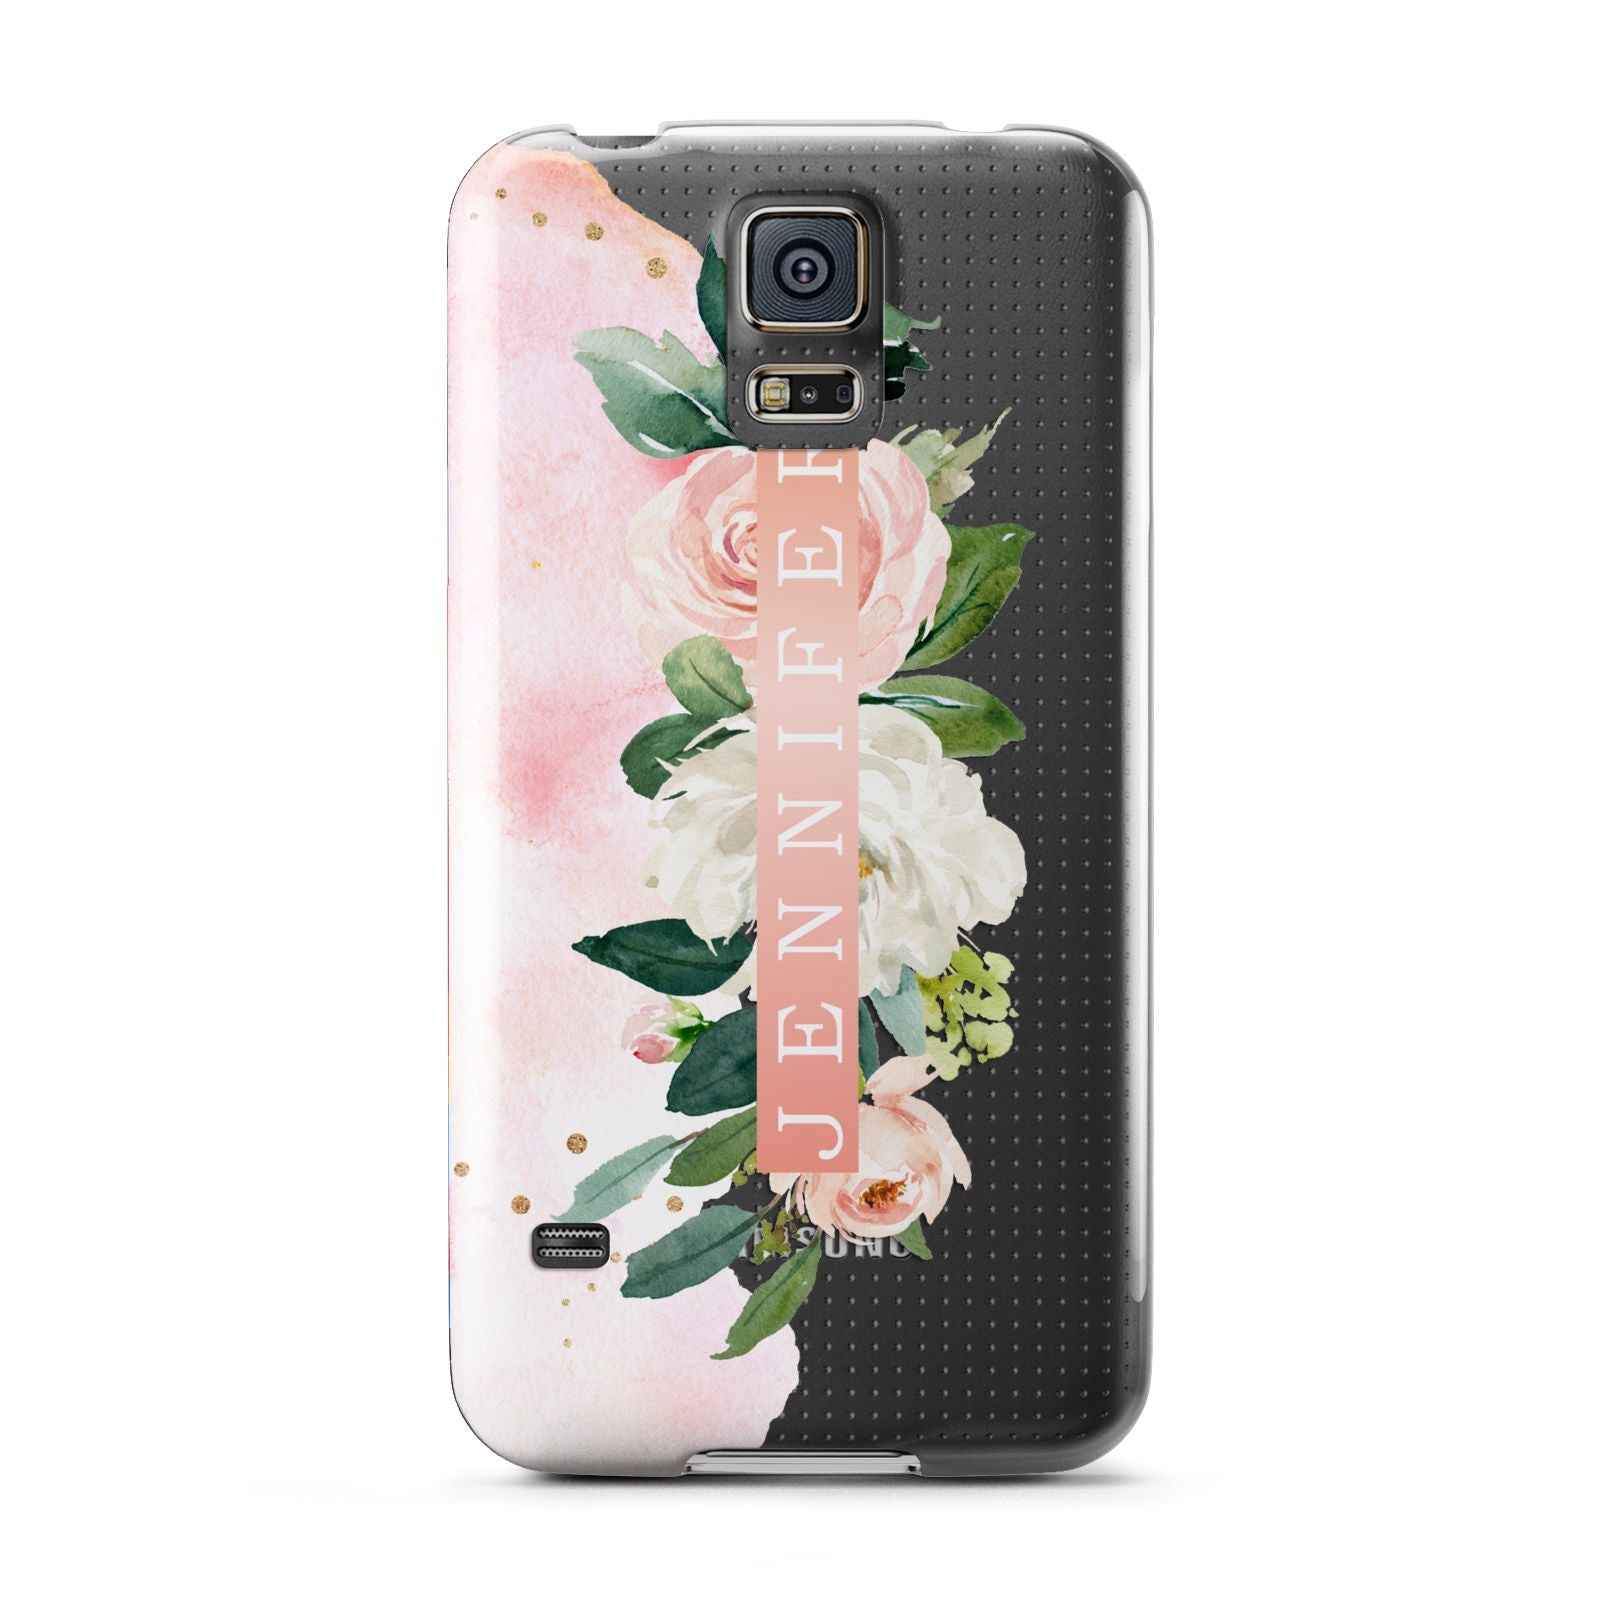 Blush Pink Personalised Name Floral Samsung Galaxy S5 Case